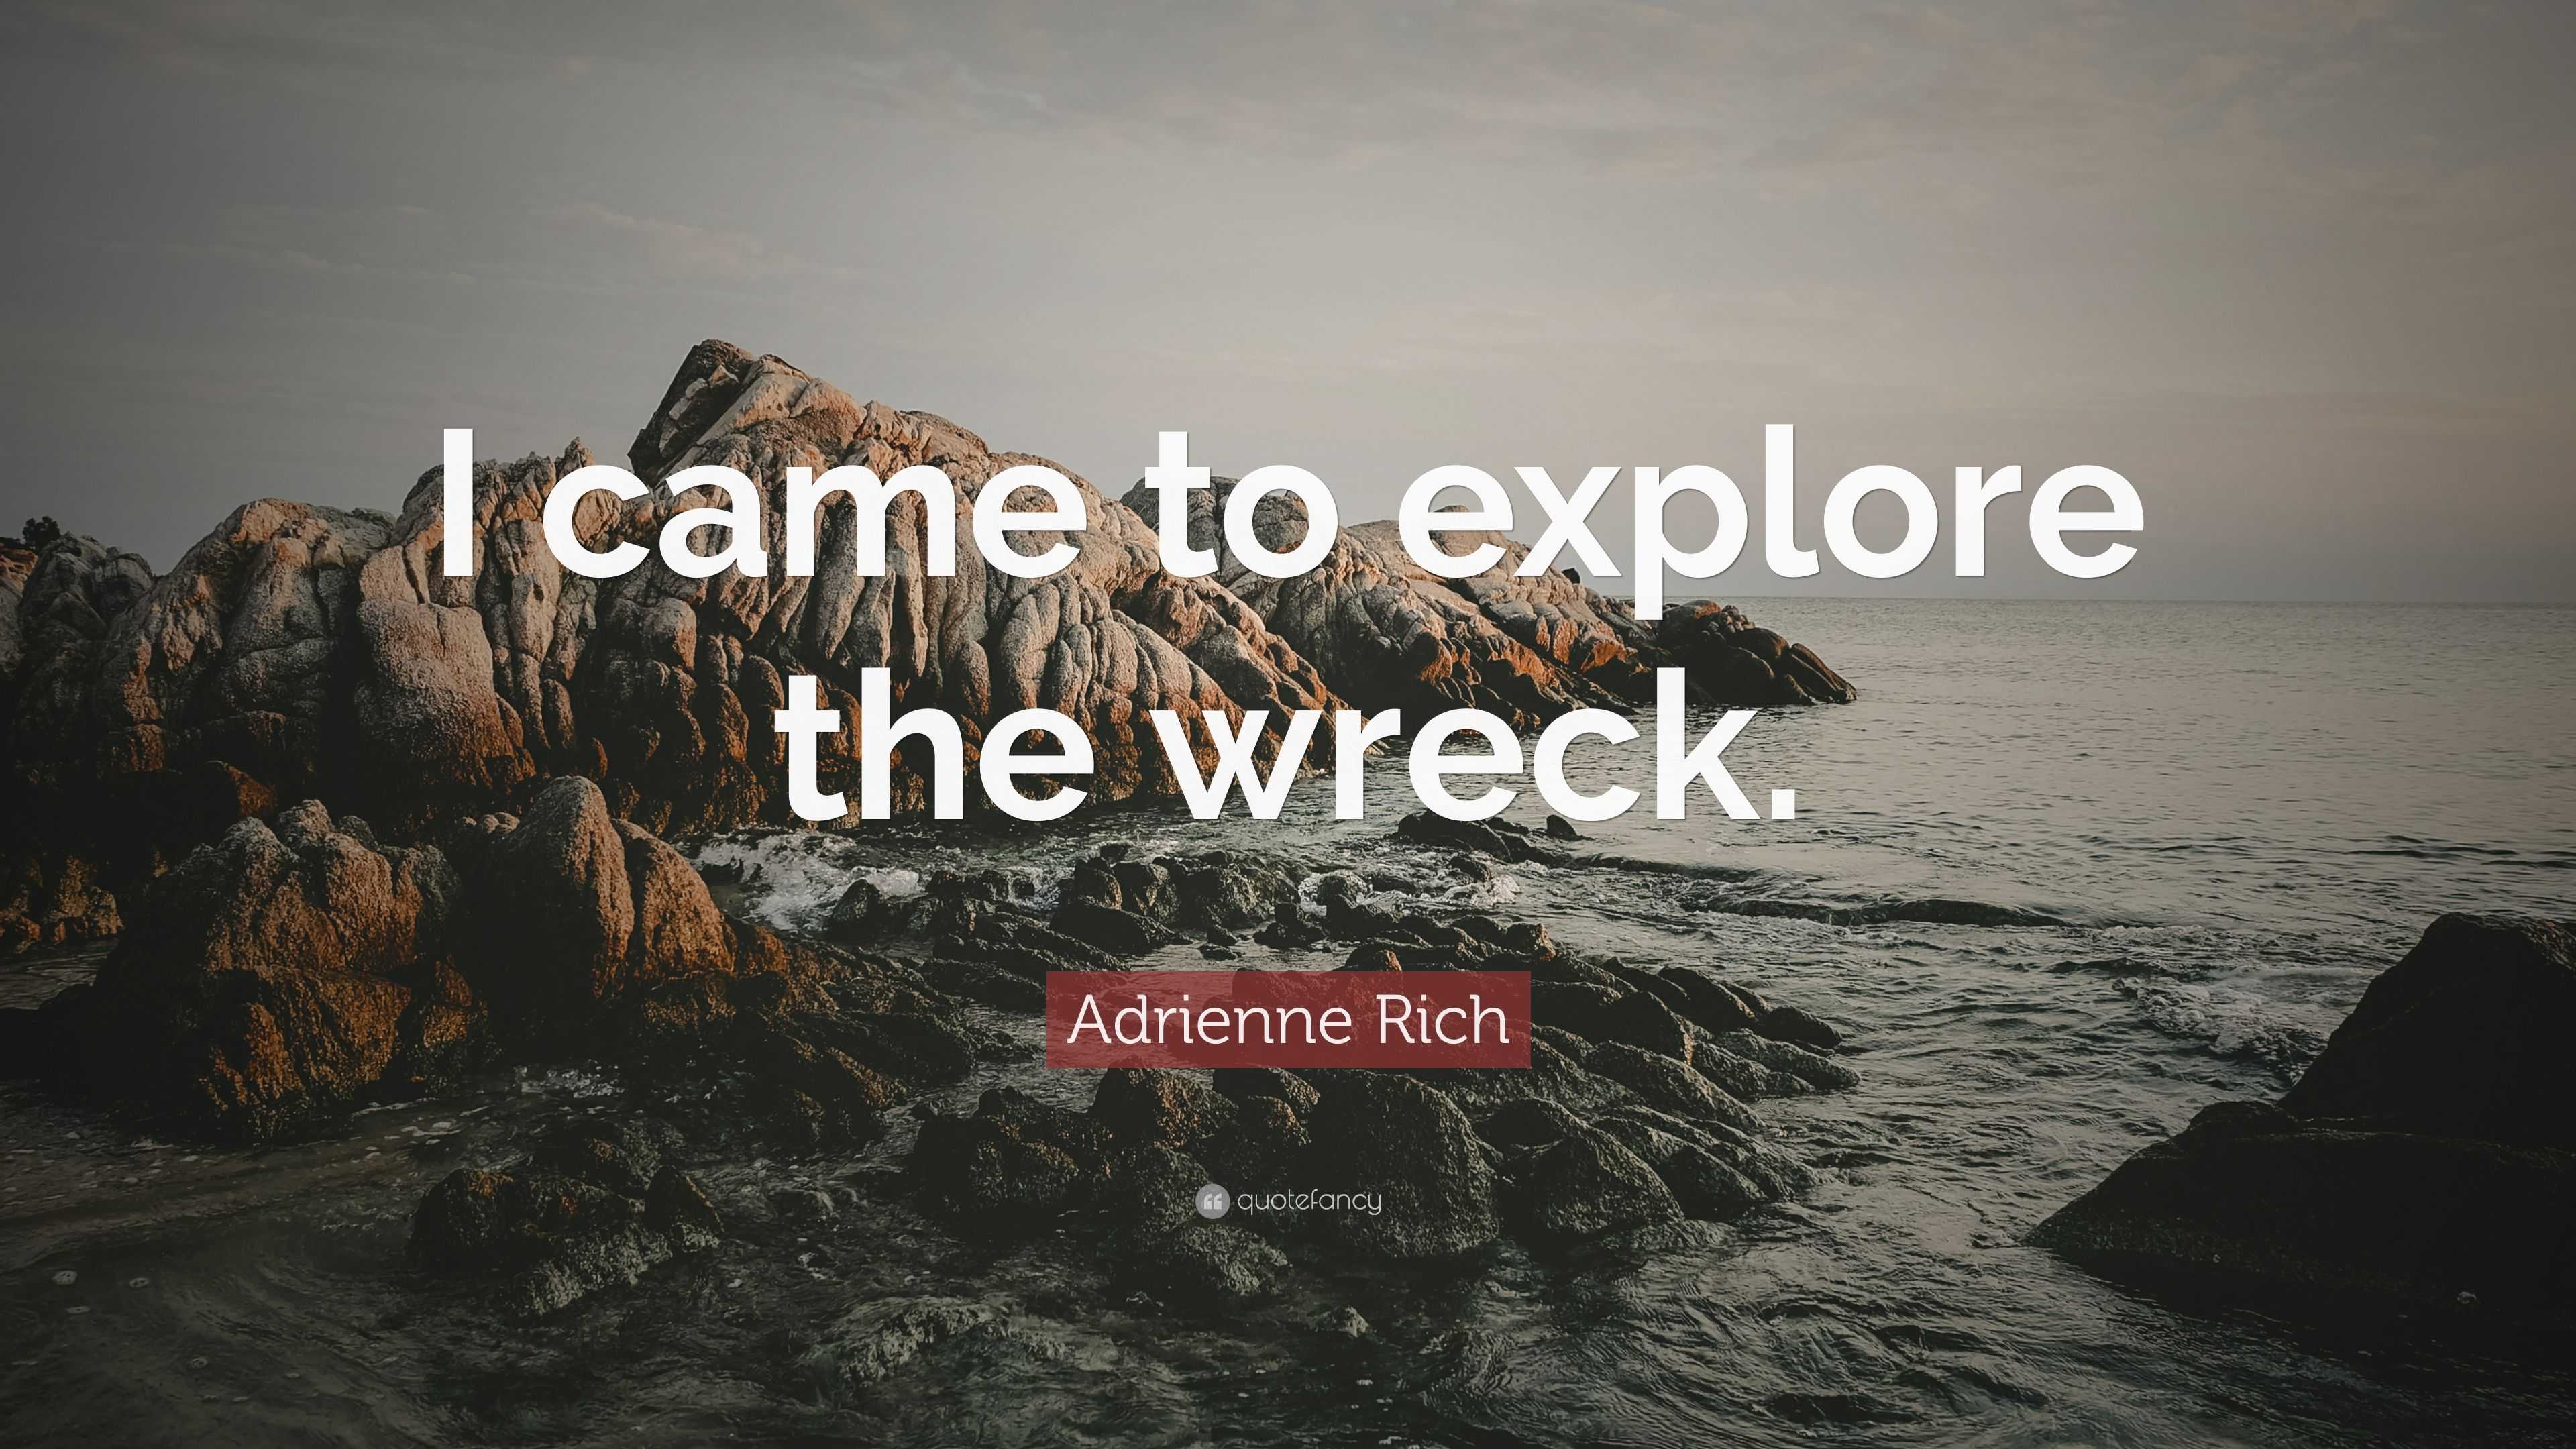 Adrienne Rich Quote: “I came to explore the wreck.”